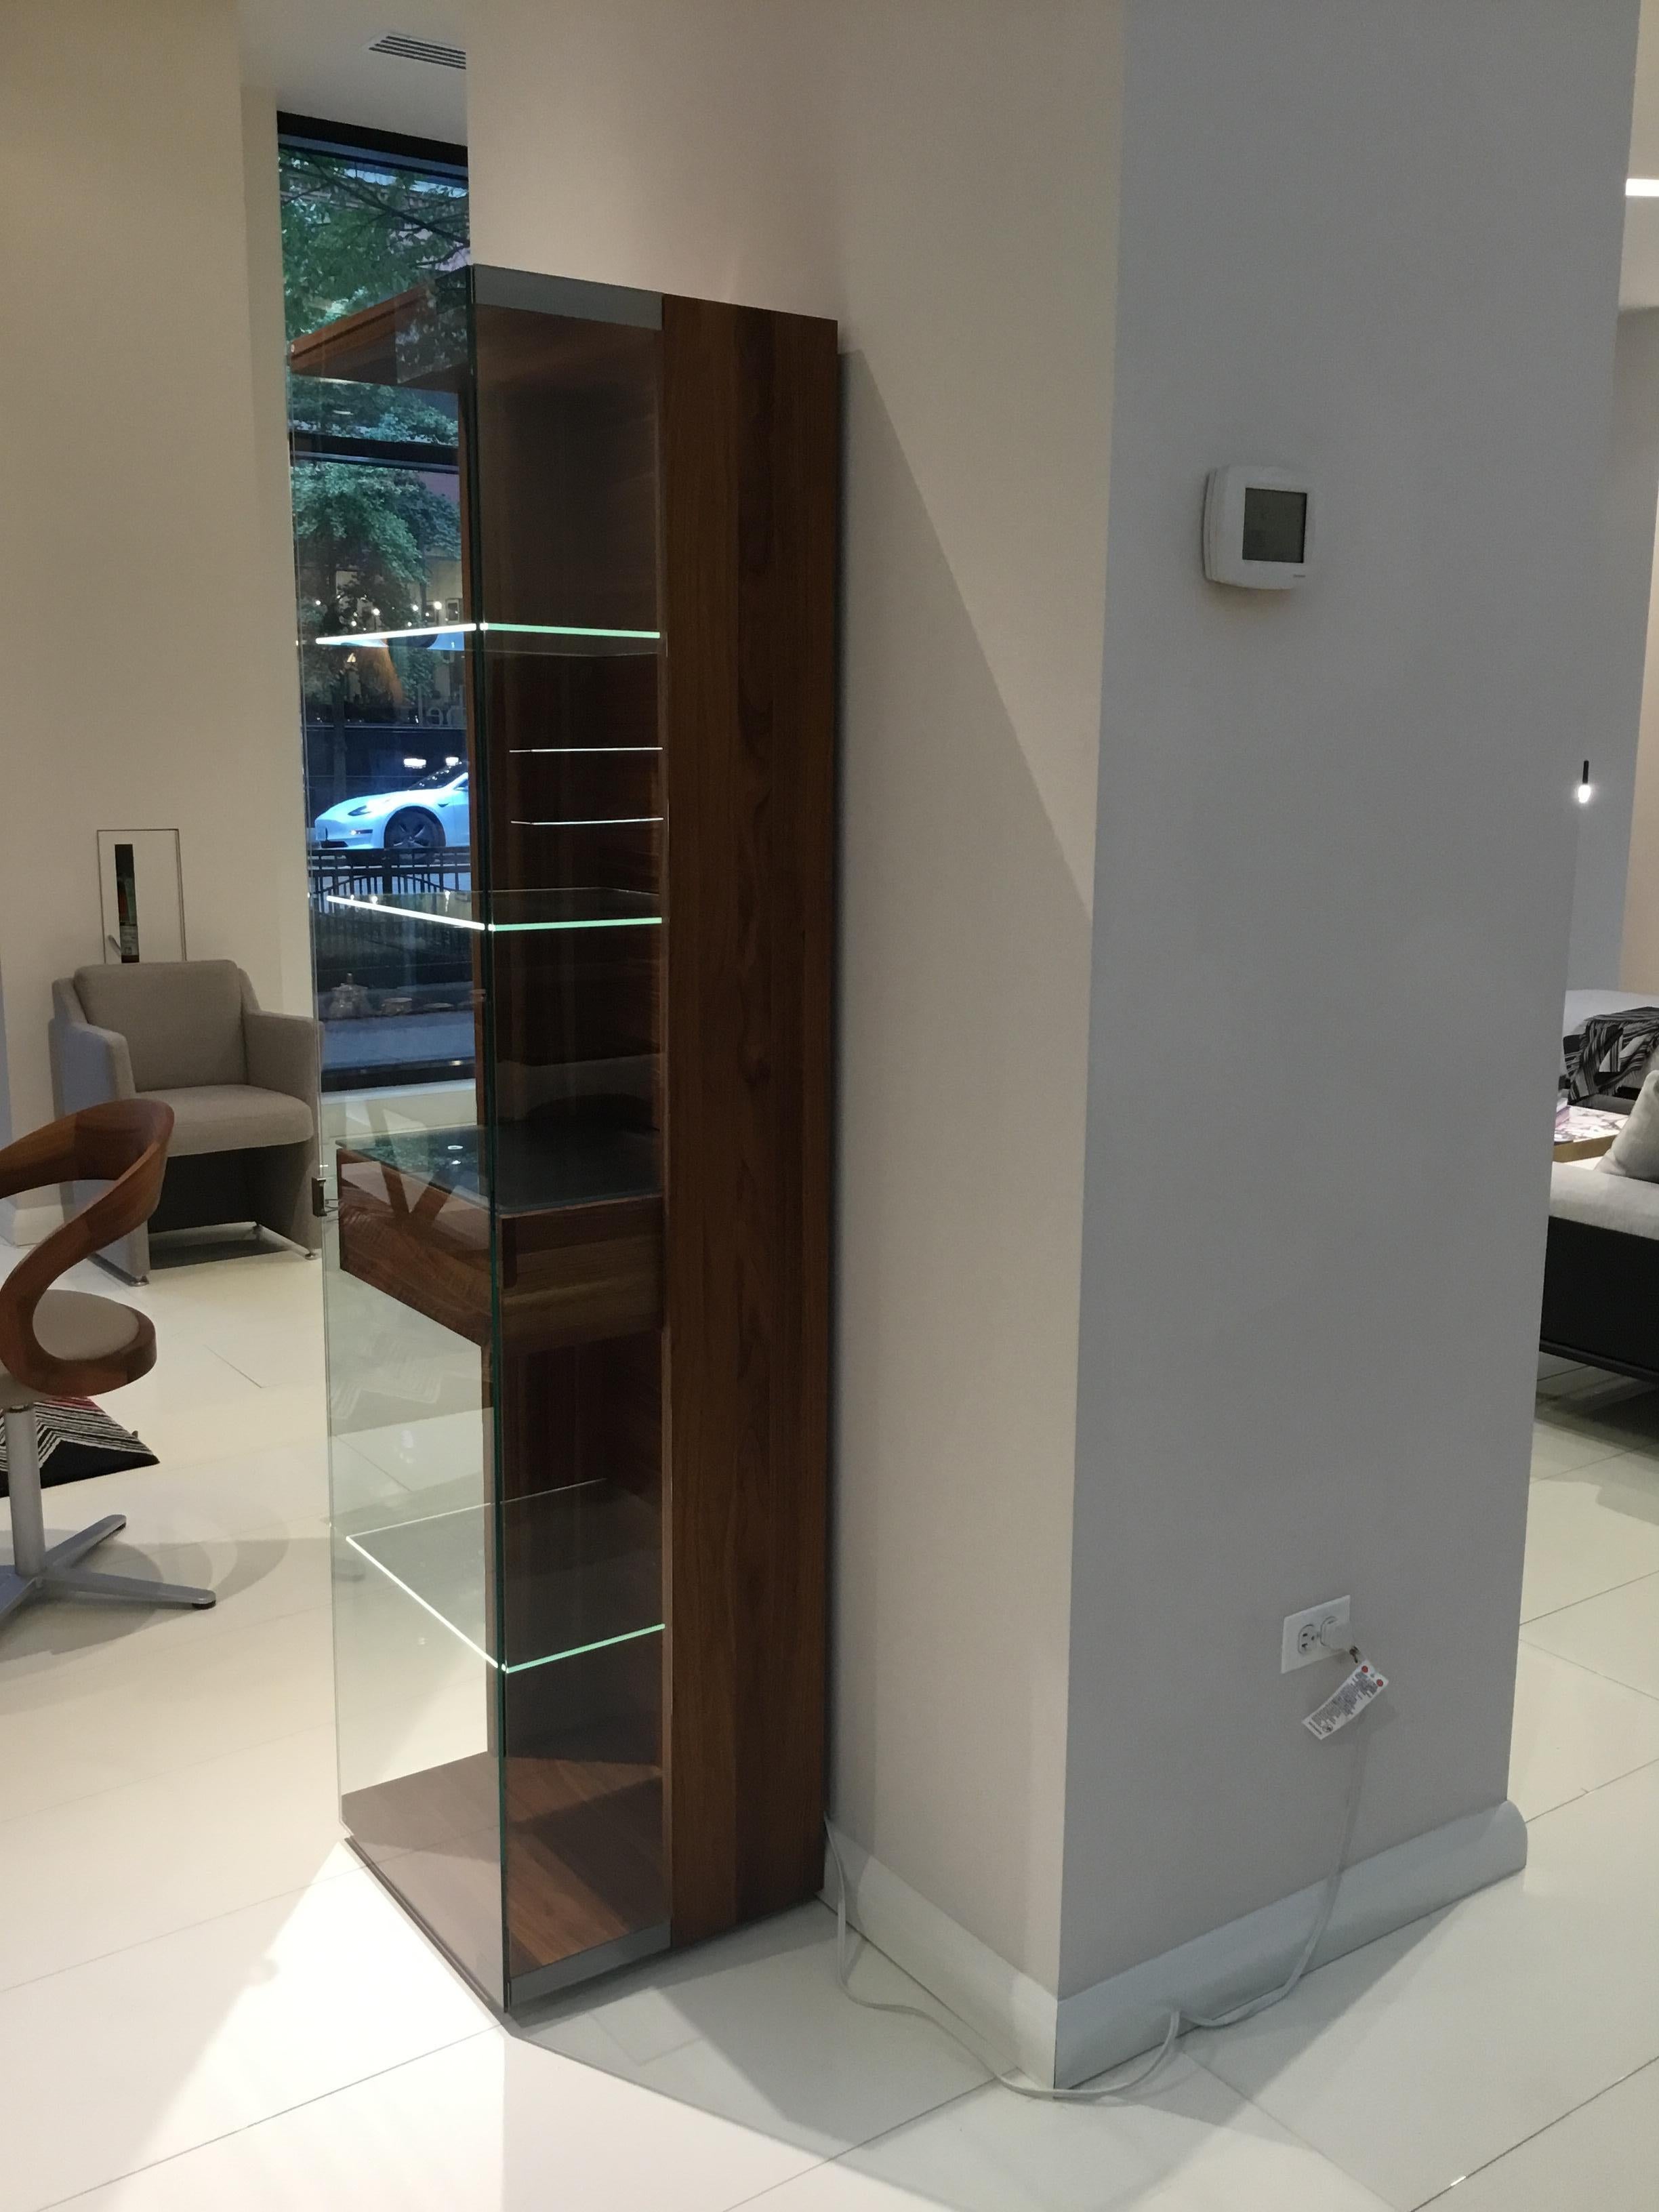 The Nox typical rounded edges and S-shaped corner joints display our skillful woodworking - the sophisticated construction of the dampened door hinges of the display cabinet show our distinctive inclination toward crafty workmanship. For they can be